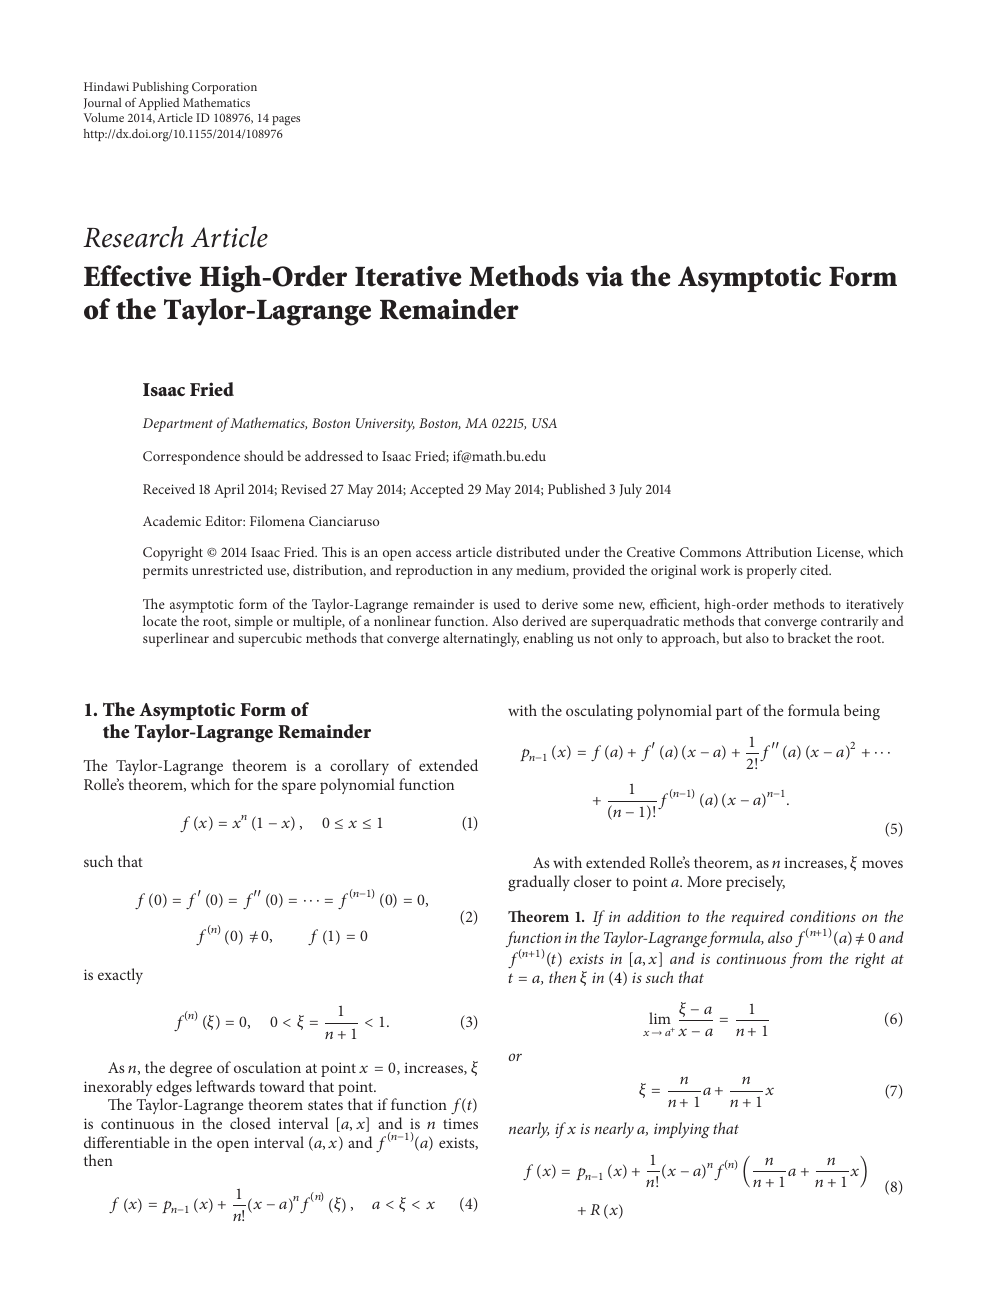 Effective High Order Iterative Methods Via The Asymptotic Form Of The Taylor Lagrange Remainder Topic Of Research Paper In Mathematics Download Scholarly Article Pdf And Read For Free On Cyberleninka Open Science Hub